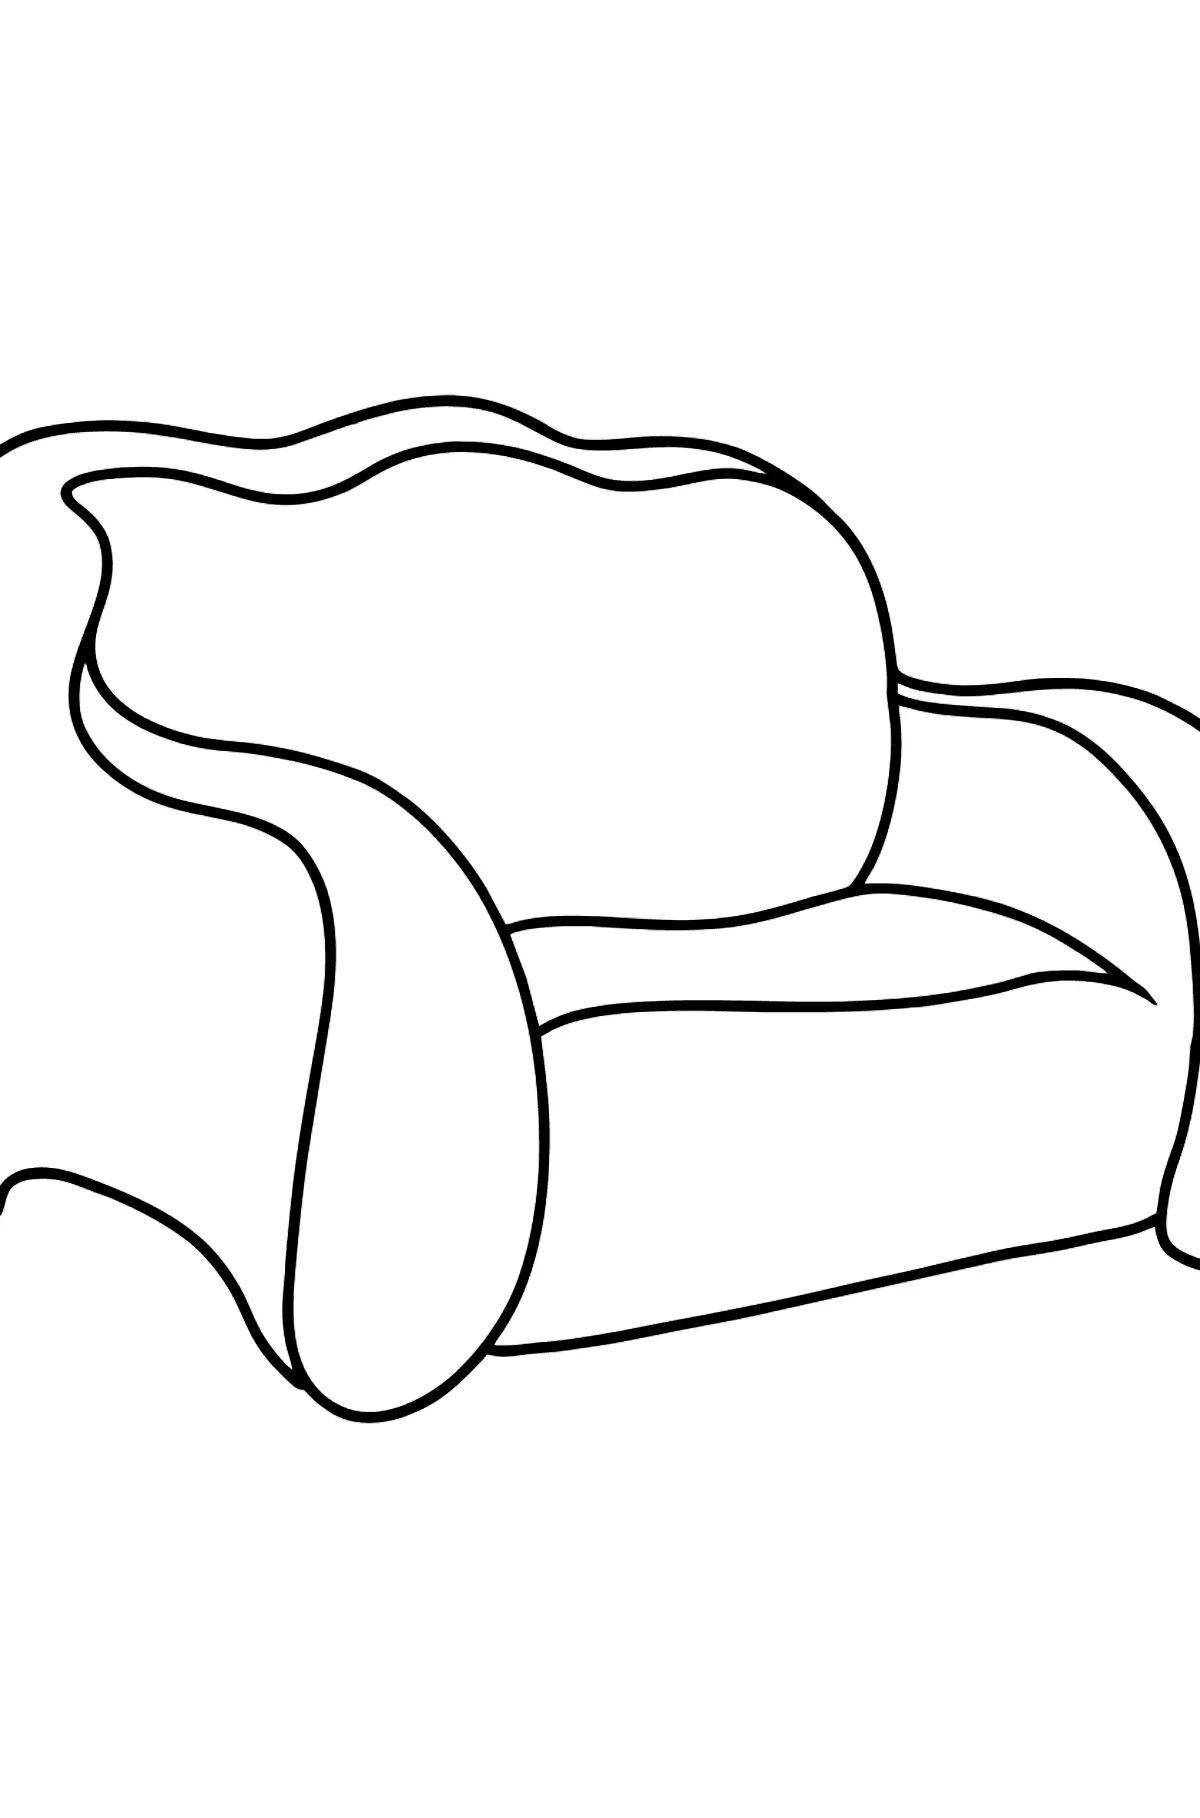 Coloring sofa for children 3-4 years old